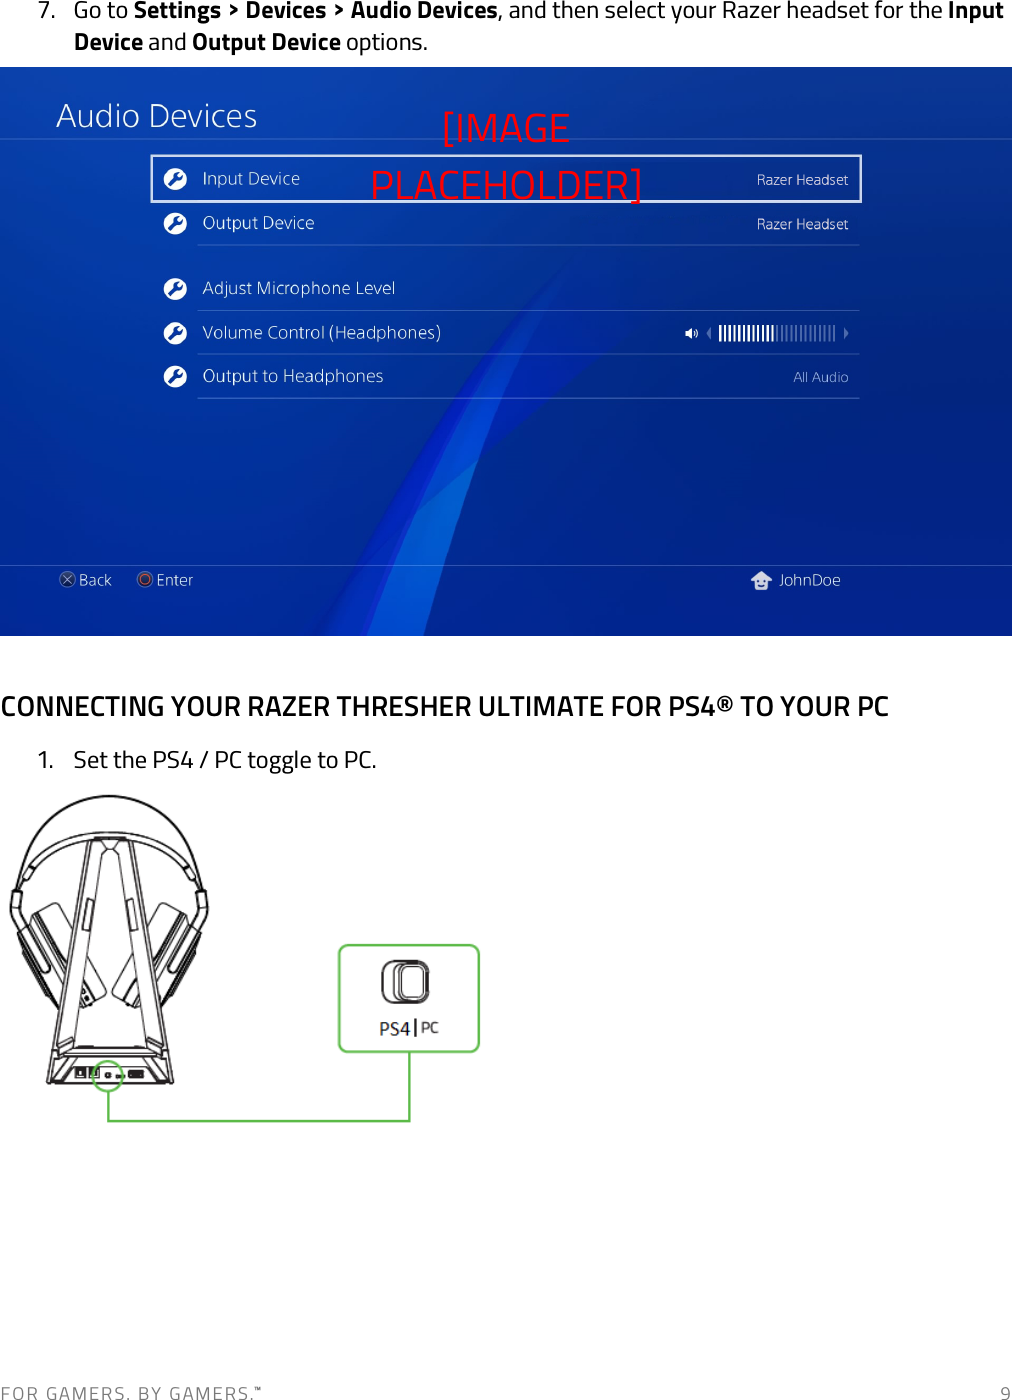 F O R   G A M E R S .   B Y   G AM E R S .™   9 7. Go to Settings &gt; Devices &gt; Audio Devices, and then select your Razer headset for the Input Device and Output Device options.   CONNECTING YOUR RAZER THRESHER ULTIMATE FOR PS4® TO YOUR PC 1. Set the PS4 / PC toggle to PC.     [IMAGE PLACEHOLDER] 